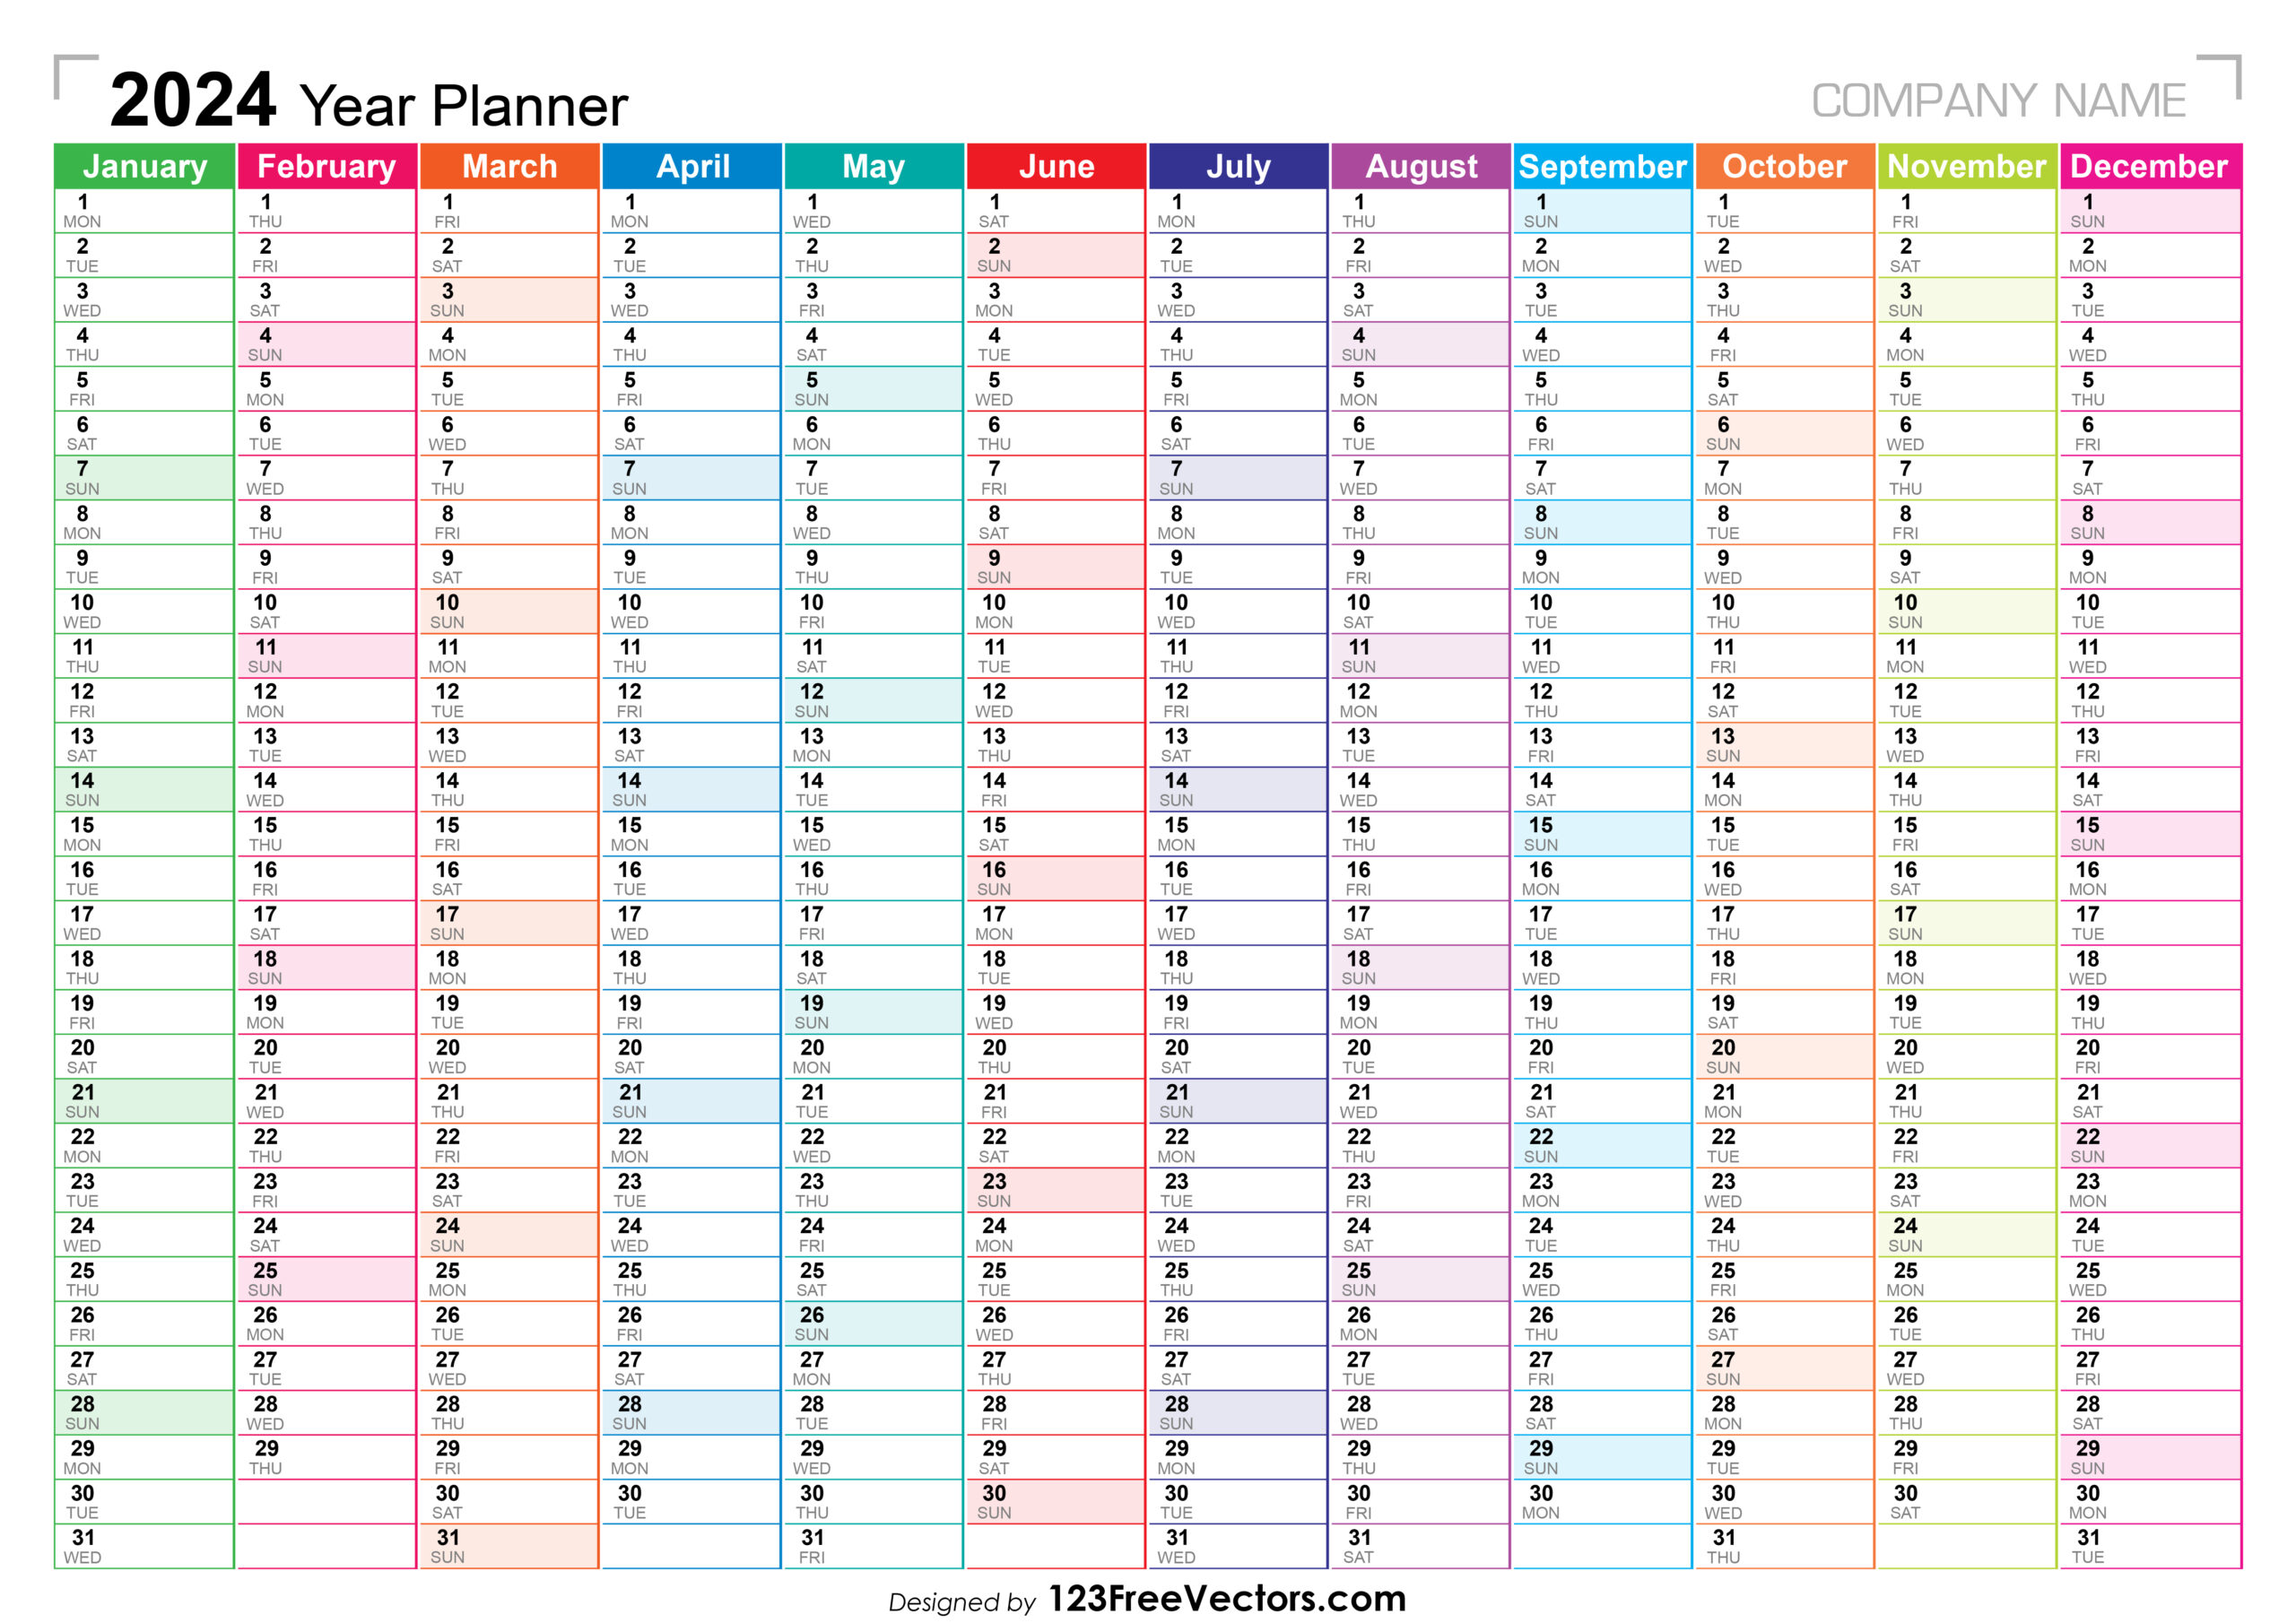 Free 2024 Year Planner | 2024 Yearly Calendar Download